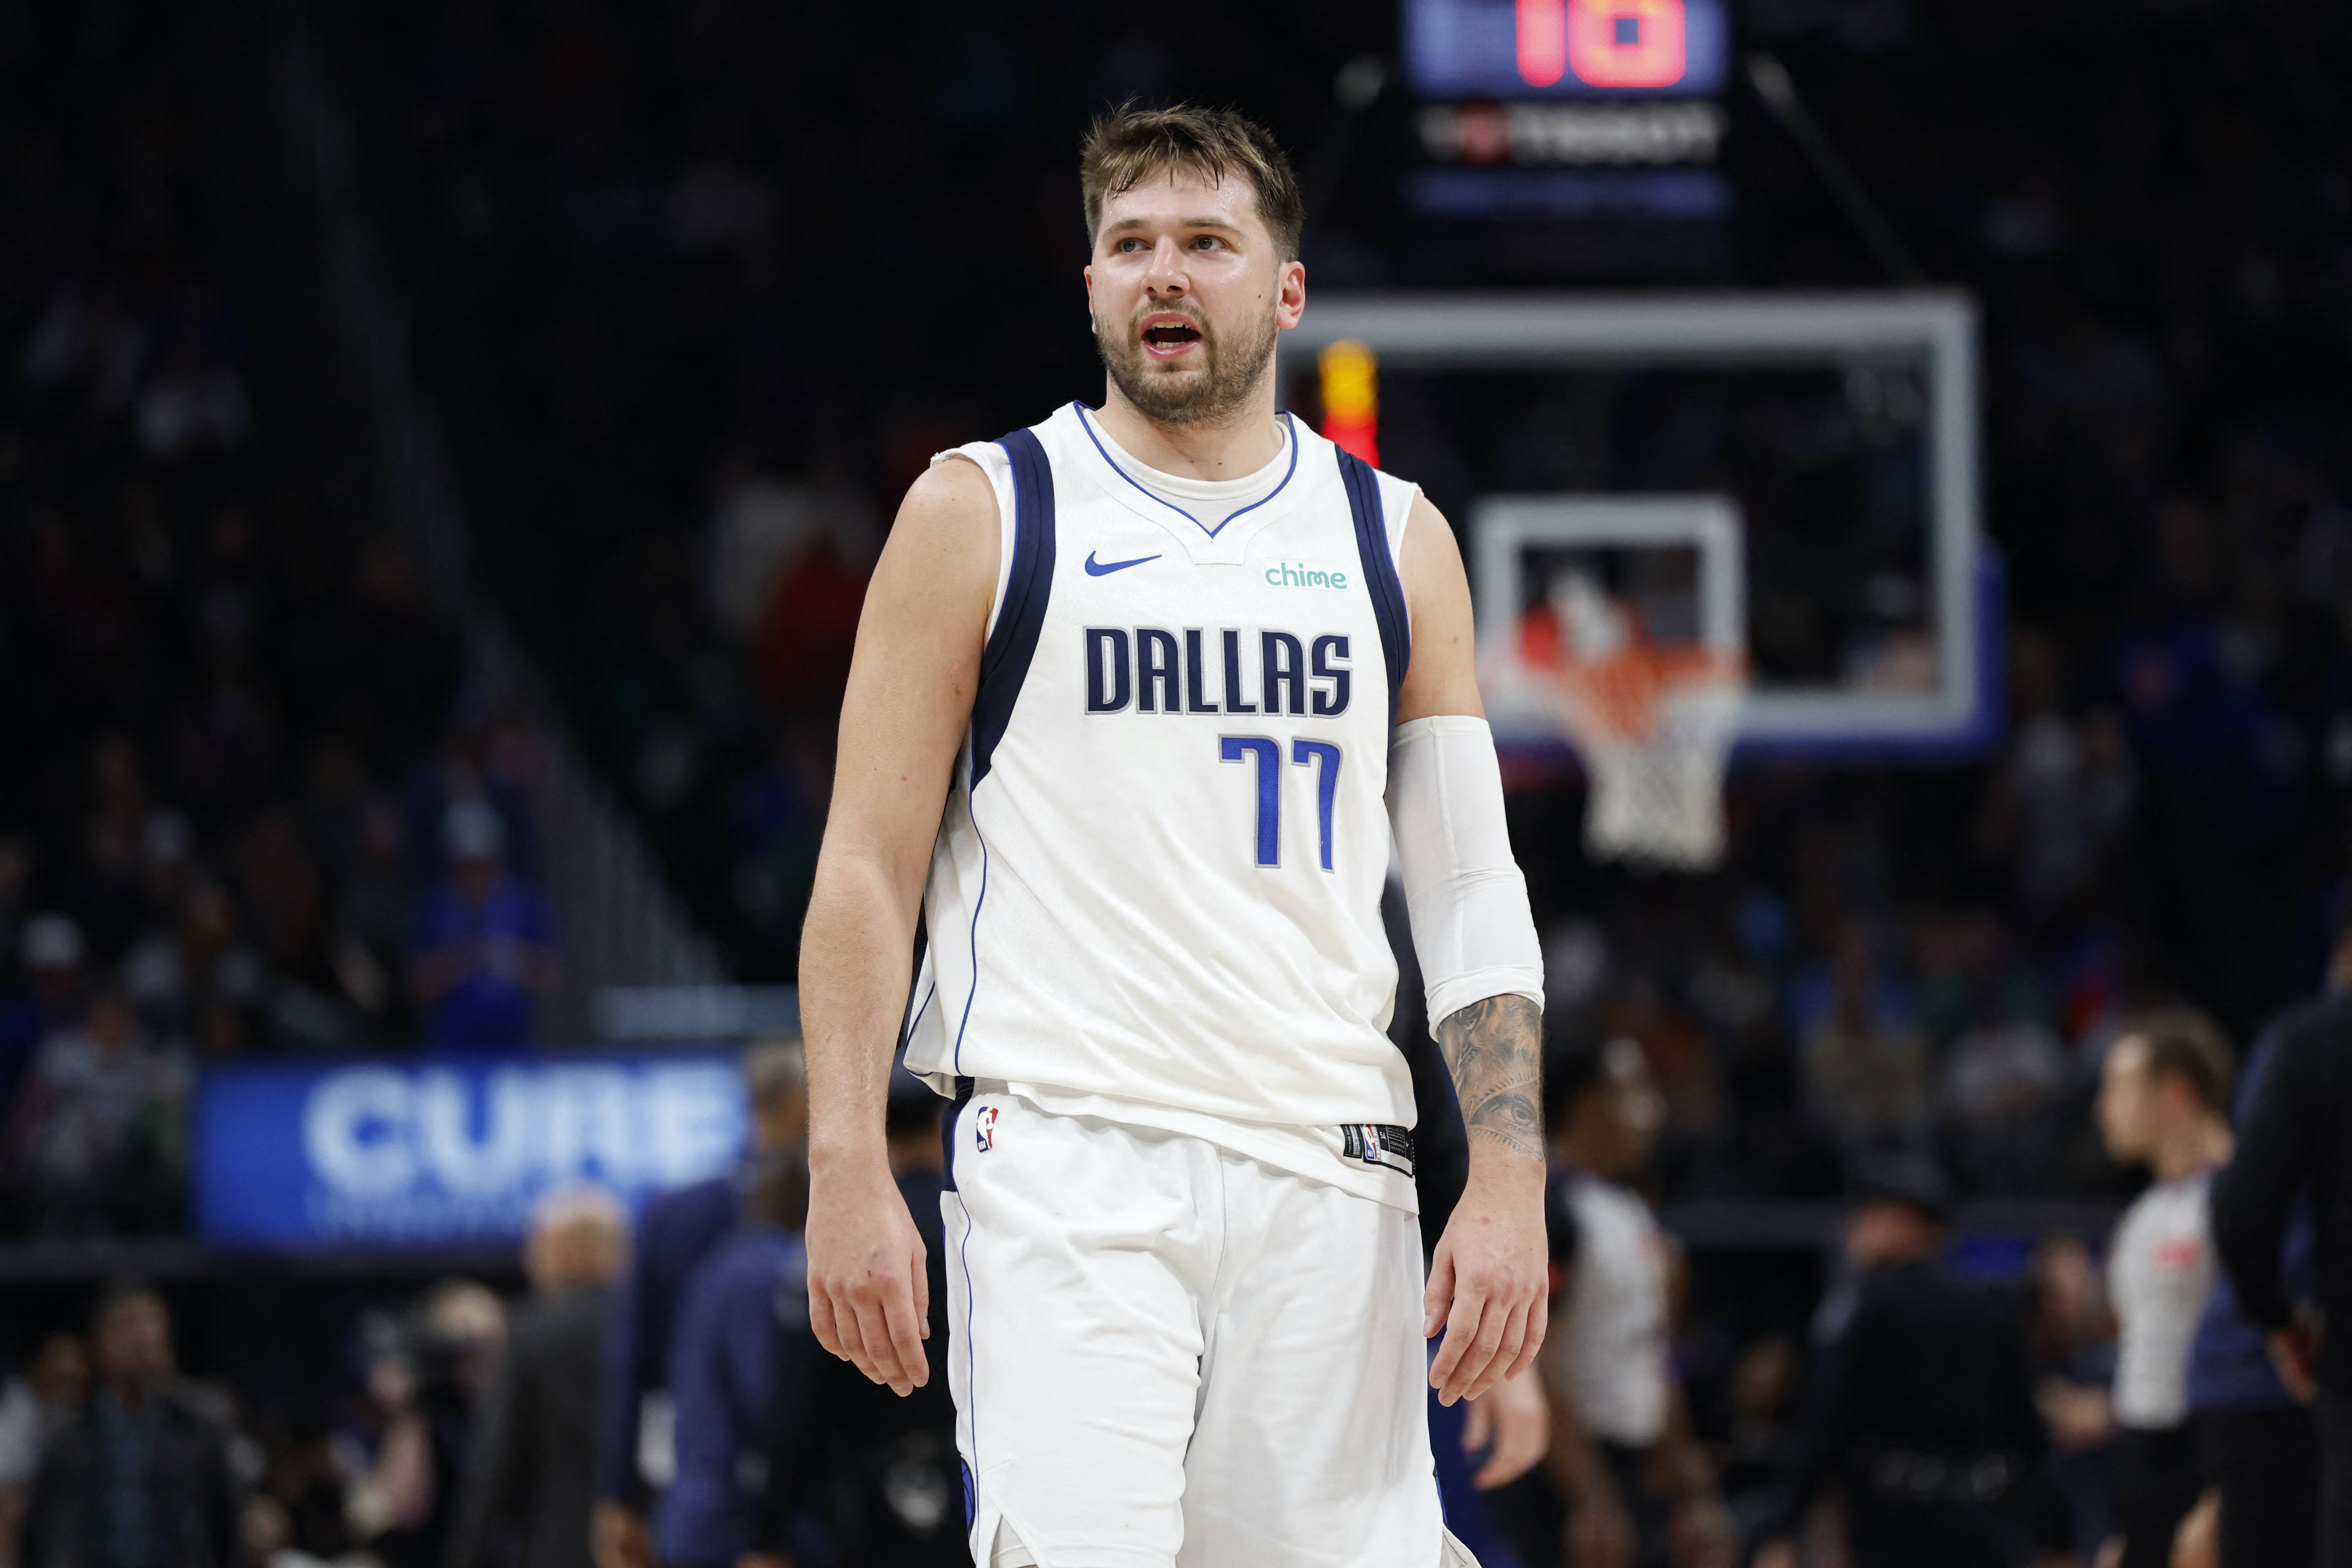 NBA: Luka Doncic, still on a roll, leads Mavs against Warriors